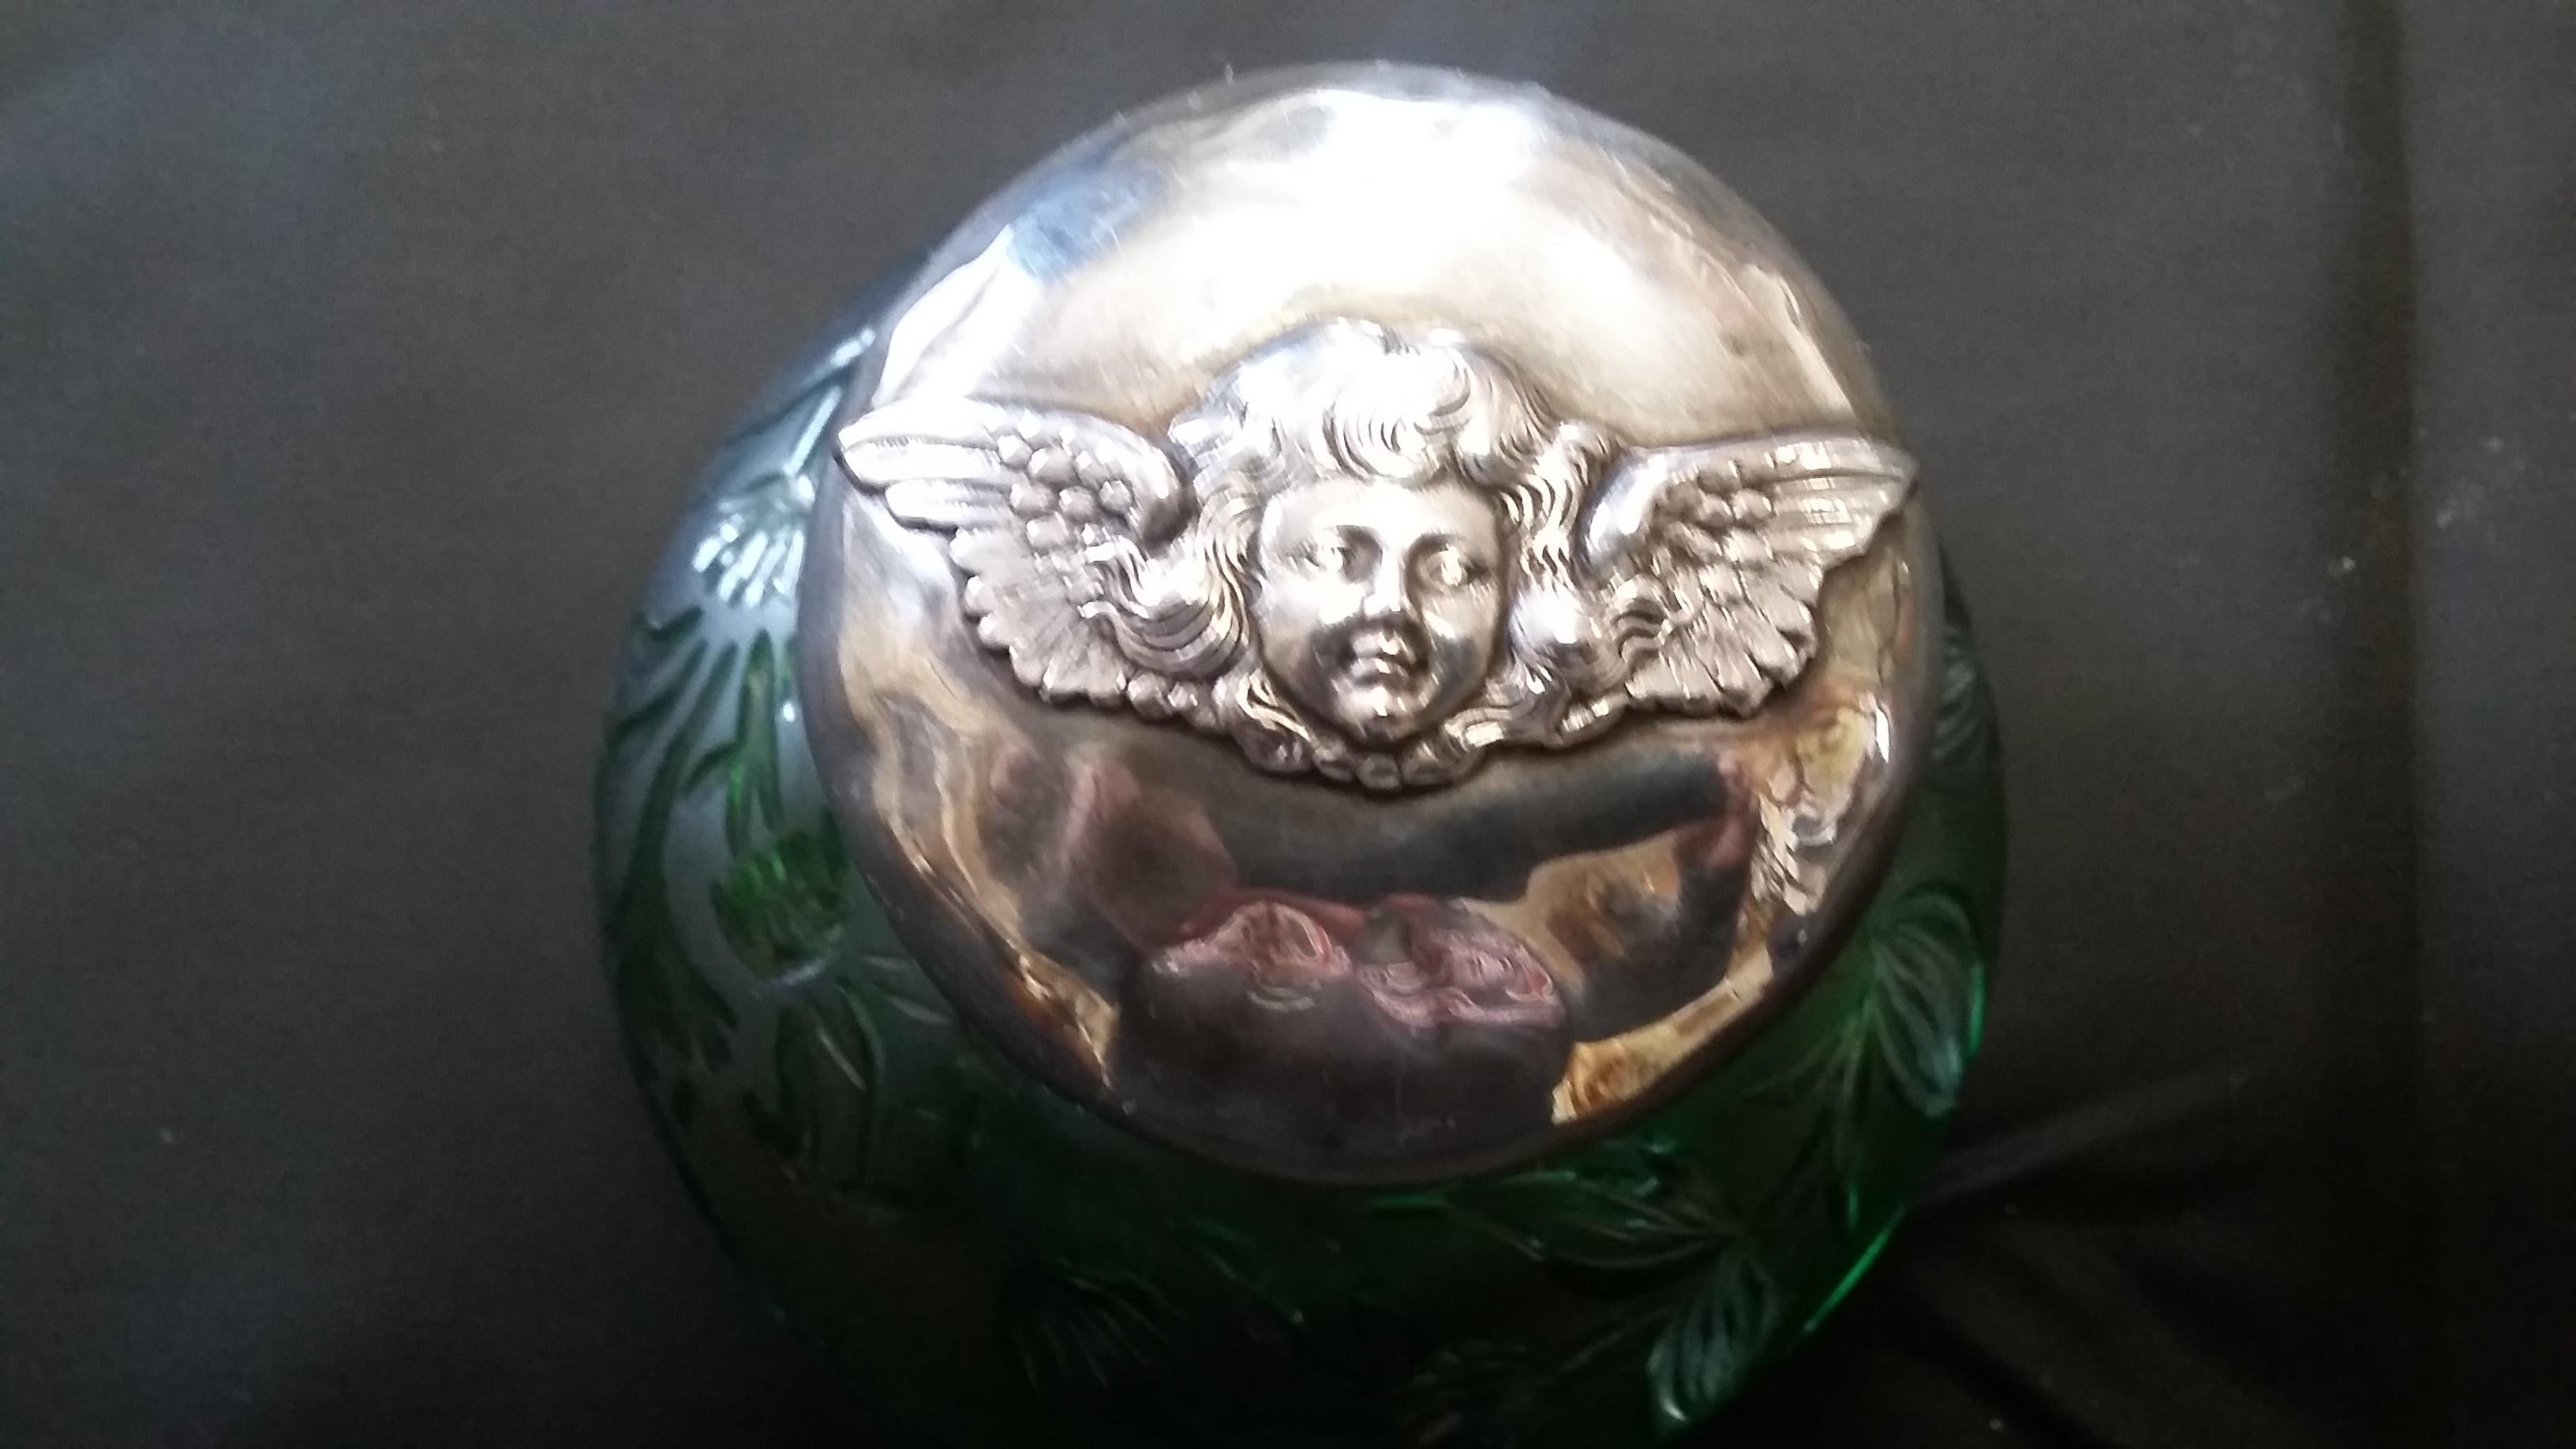 Beautiful green crystal inkwell from England circa 1890. This inkwell is complete with a glass insert and a sterling silver lid with an unique angel (cherub) motif on the lid. Lots of design on the inkwell with cut glass details on the bottom. 
On